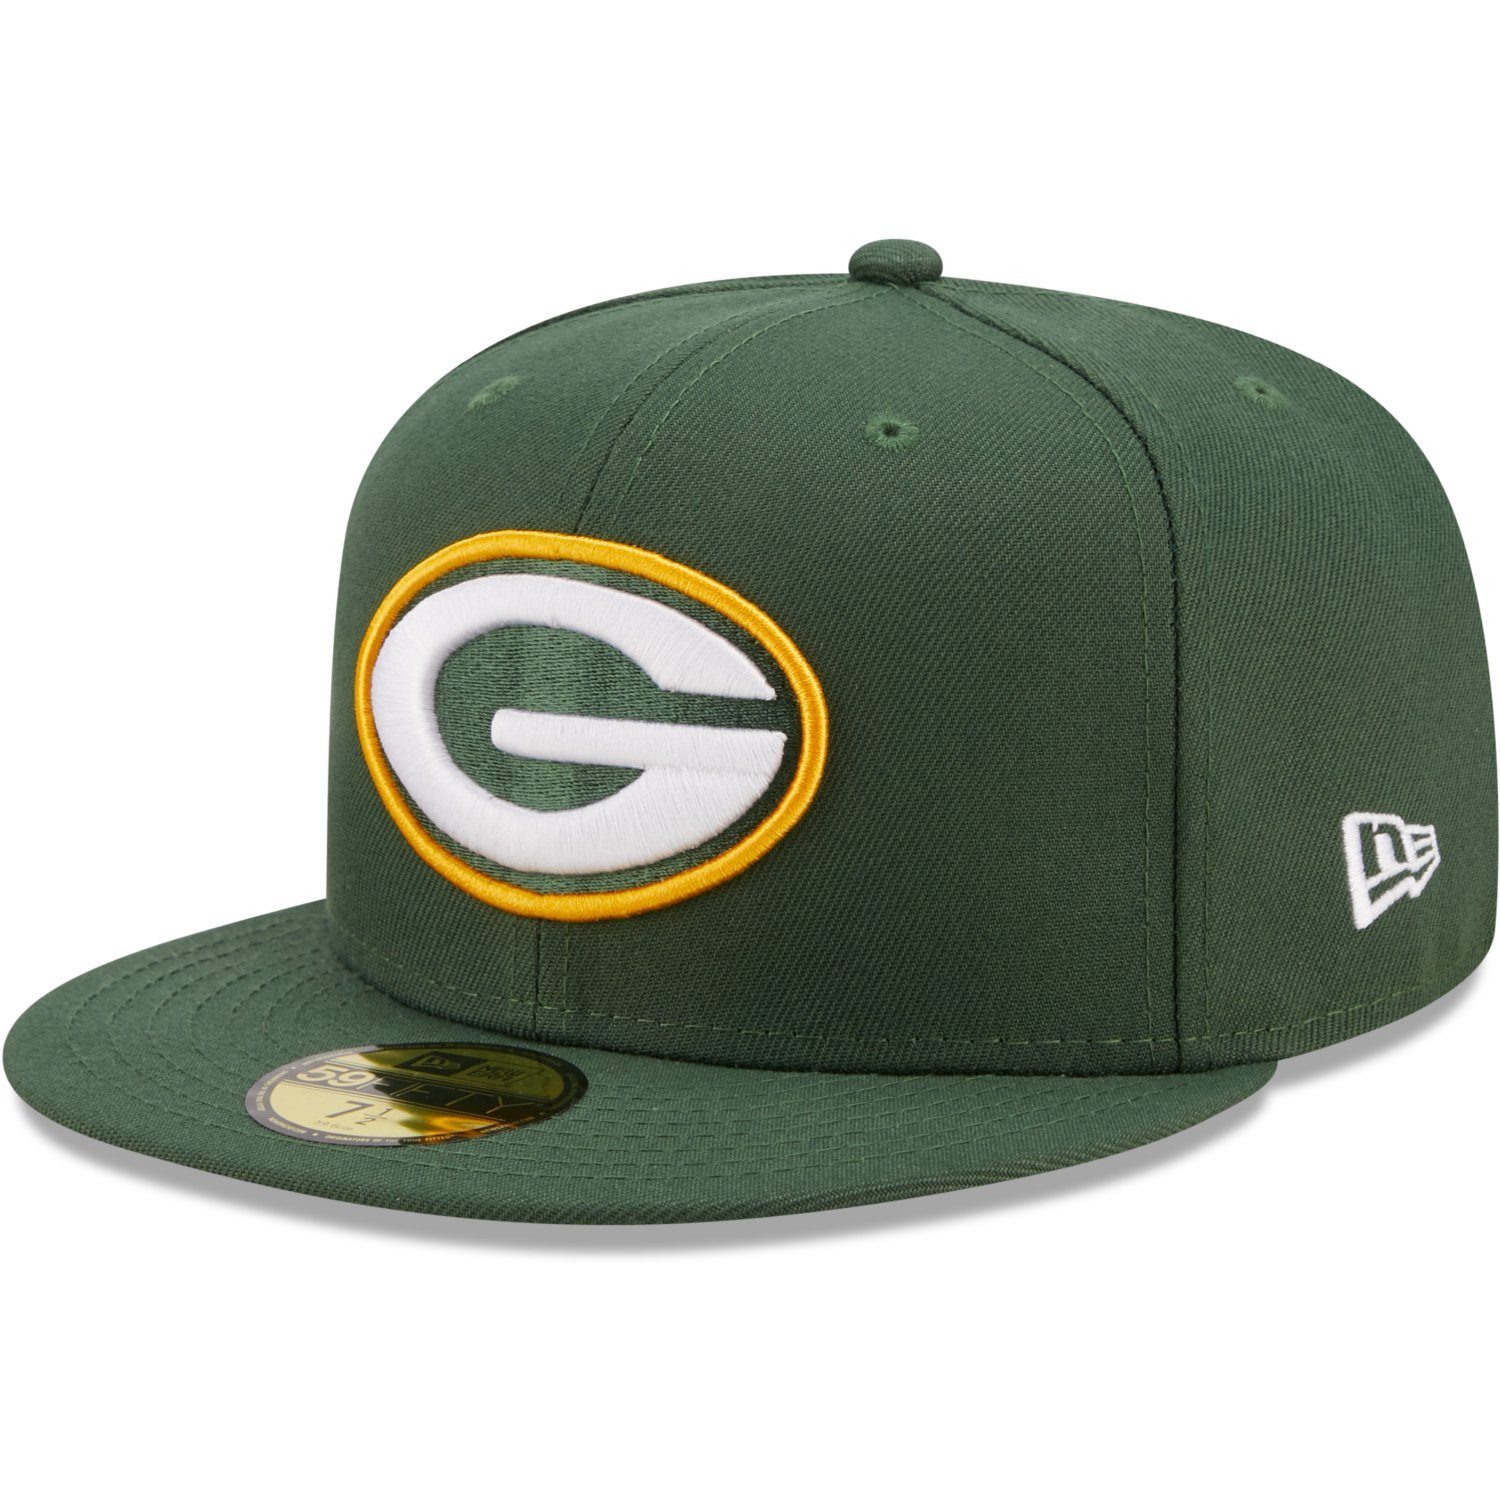 59Fifty Green Era New SIDE Packers PATCH Fitted Cap Bay